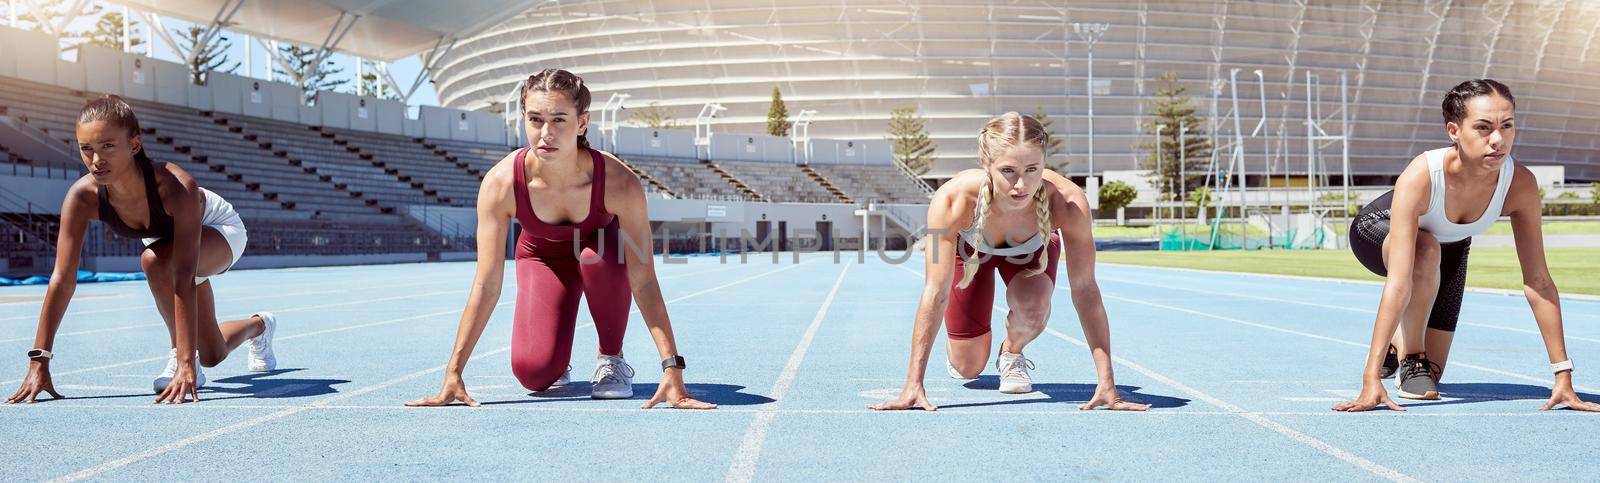 Group of determined female athletes in starting position to begin a sprint or running race on a sports track in a stadium. Focused and diverse women ready to compete in track and field olympic event.